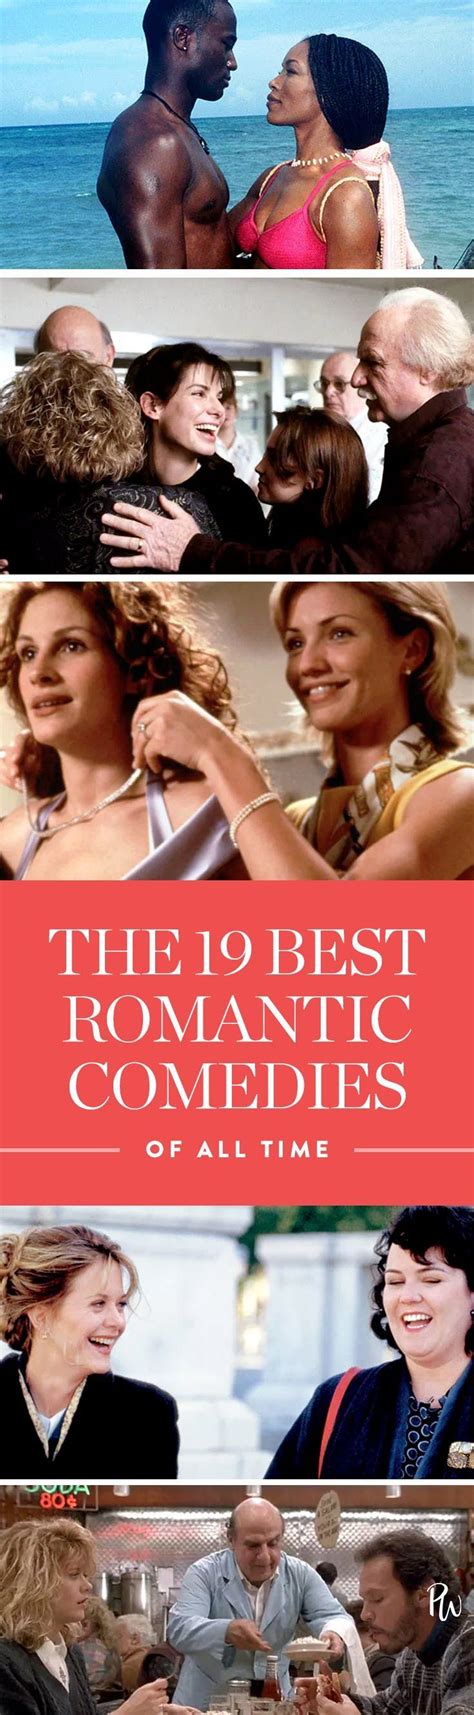 Subscribe if you're interested in more movie. The 19 Best Romantic Comedies of All Time | Best romantic ...